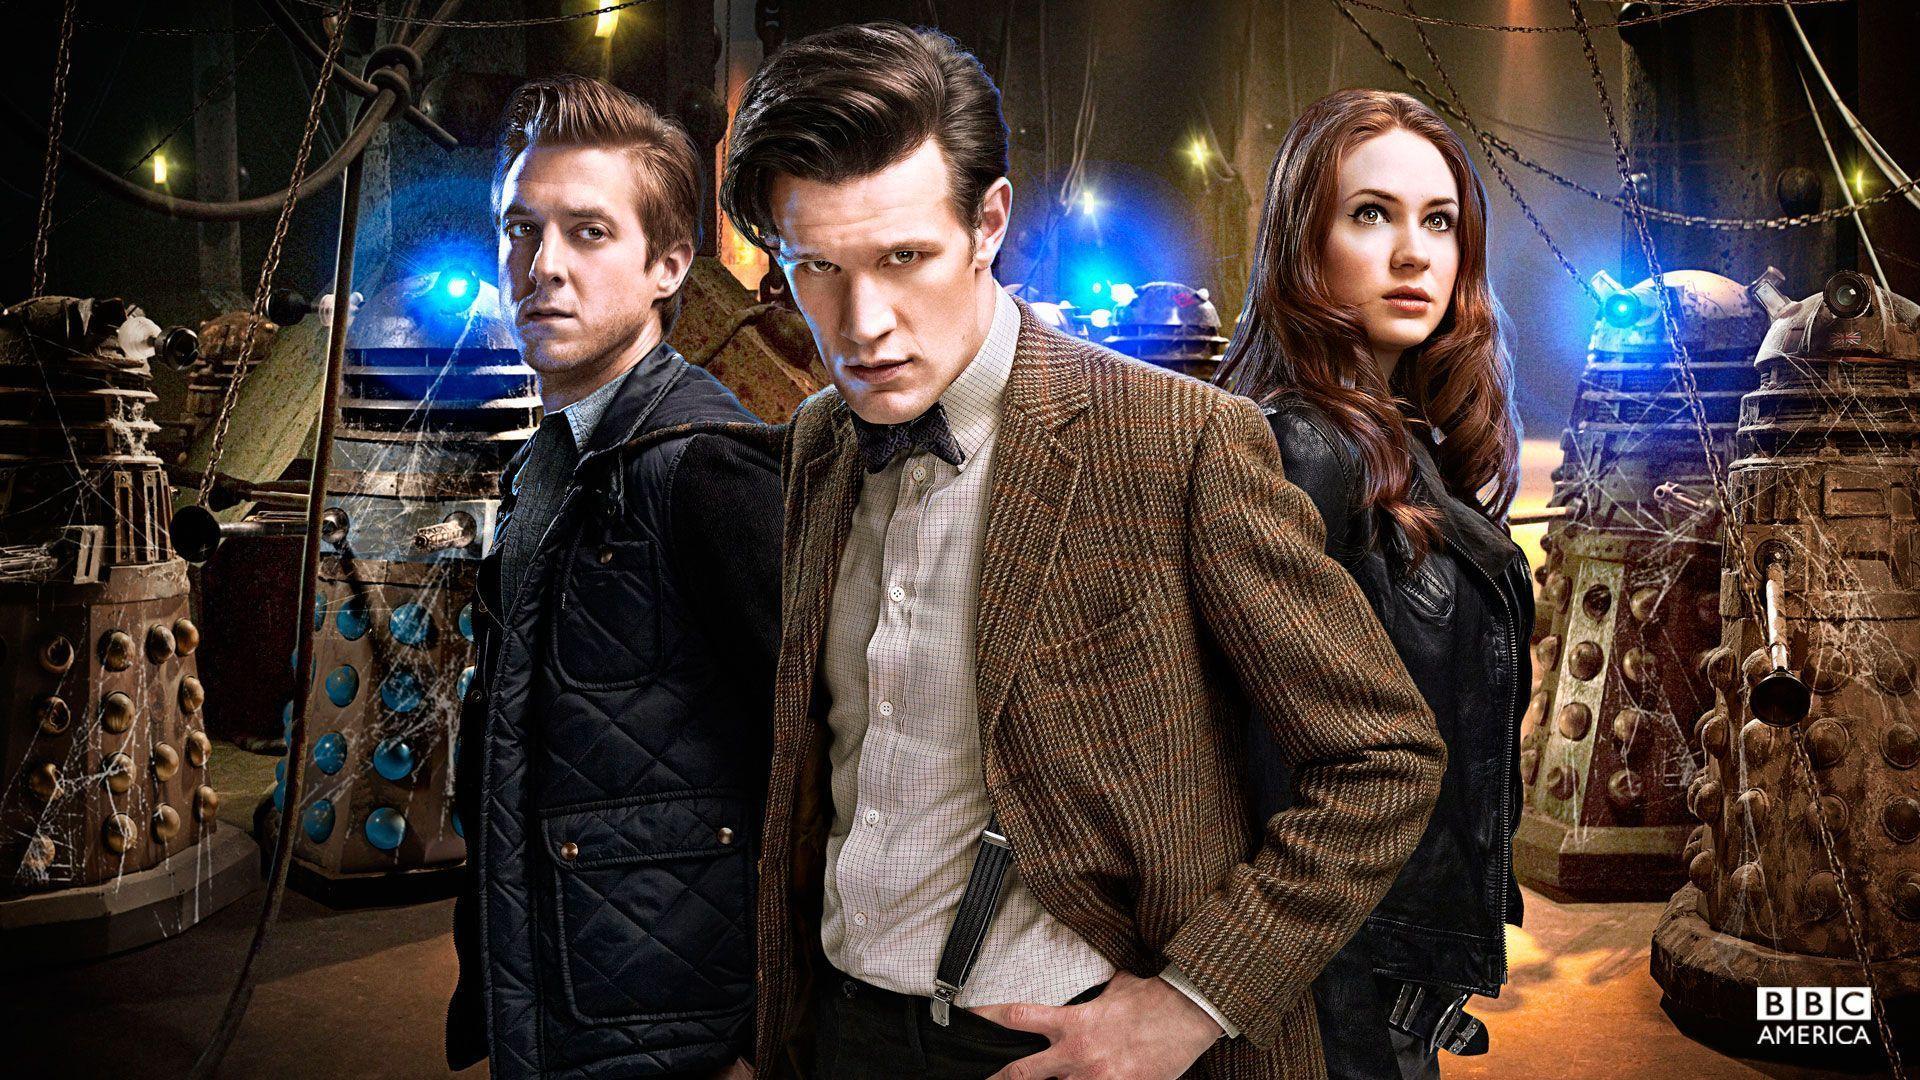 dw_s7_wallpaper_03_web doctor who wallpapers HD free wallpapers